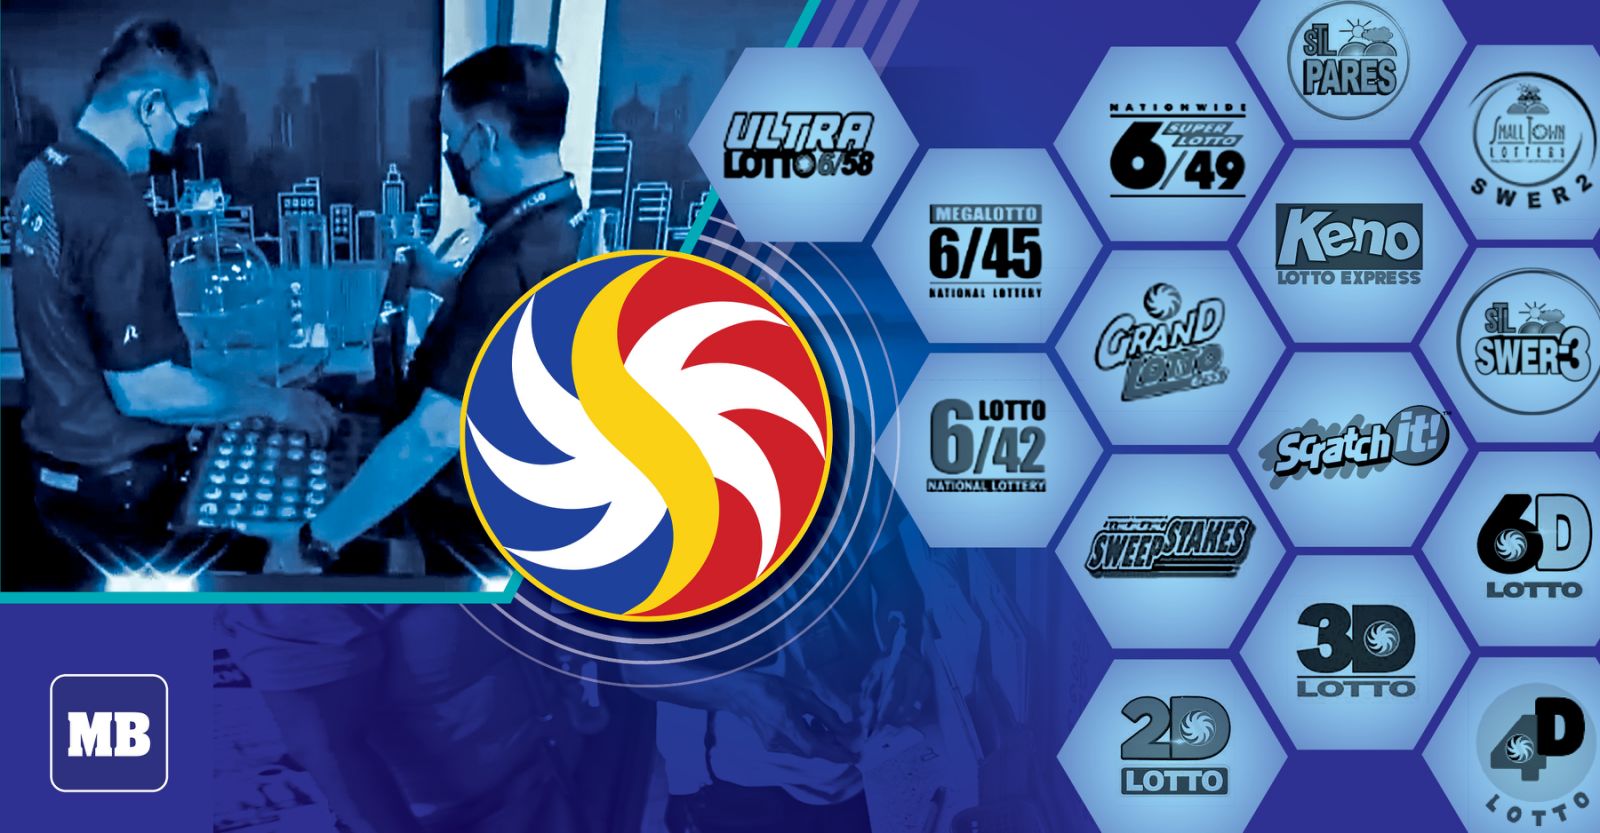 P100-M Super Lotto jackpot still up for grabs thumbnail